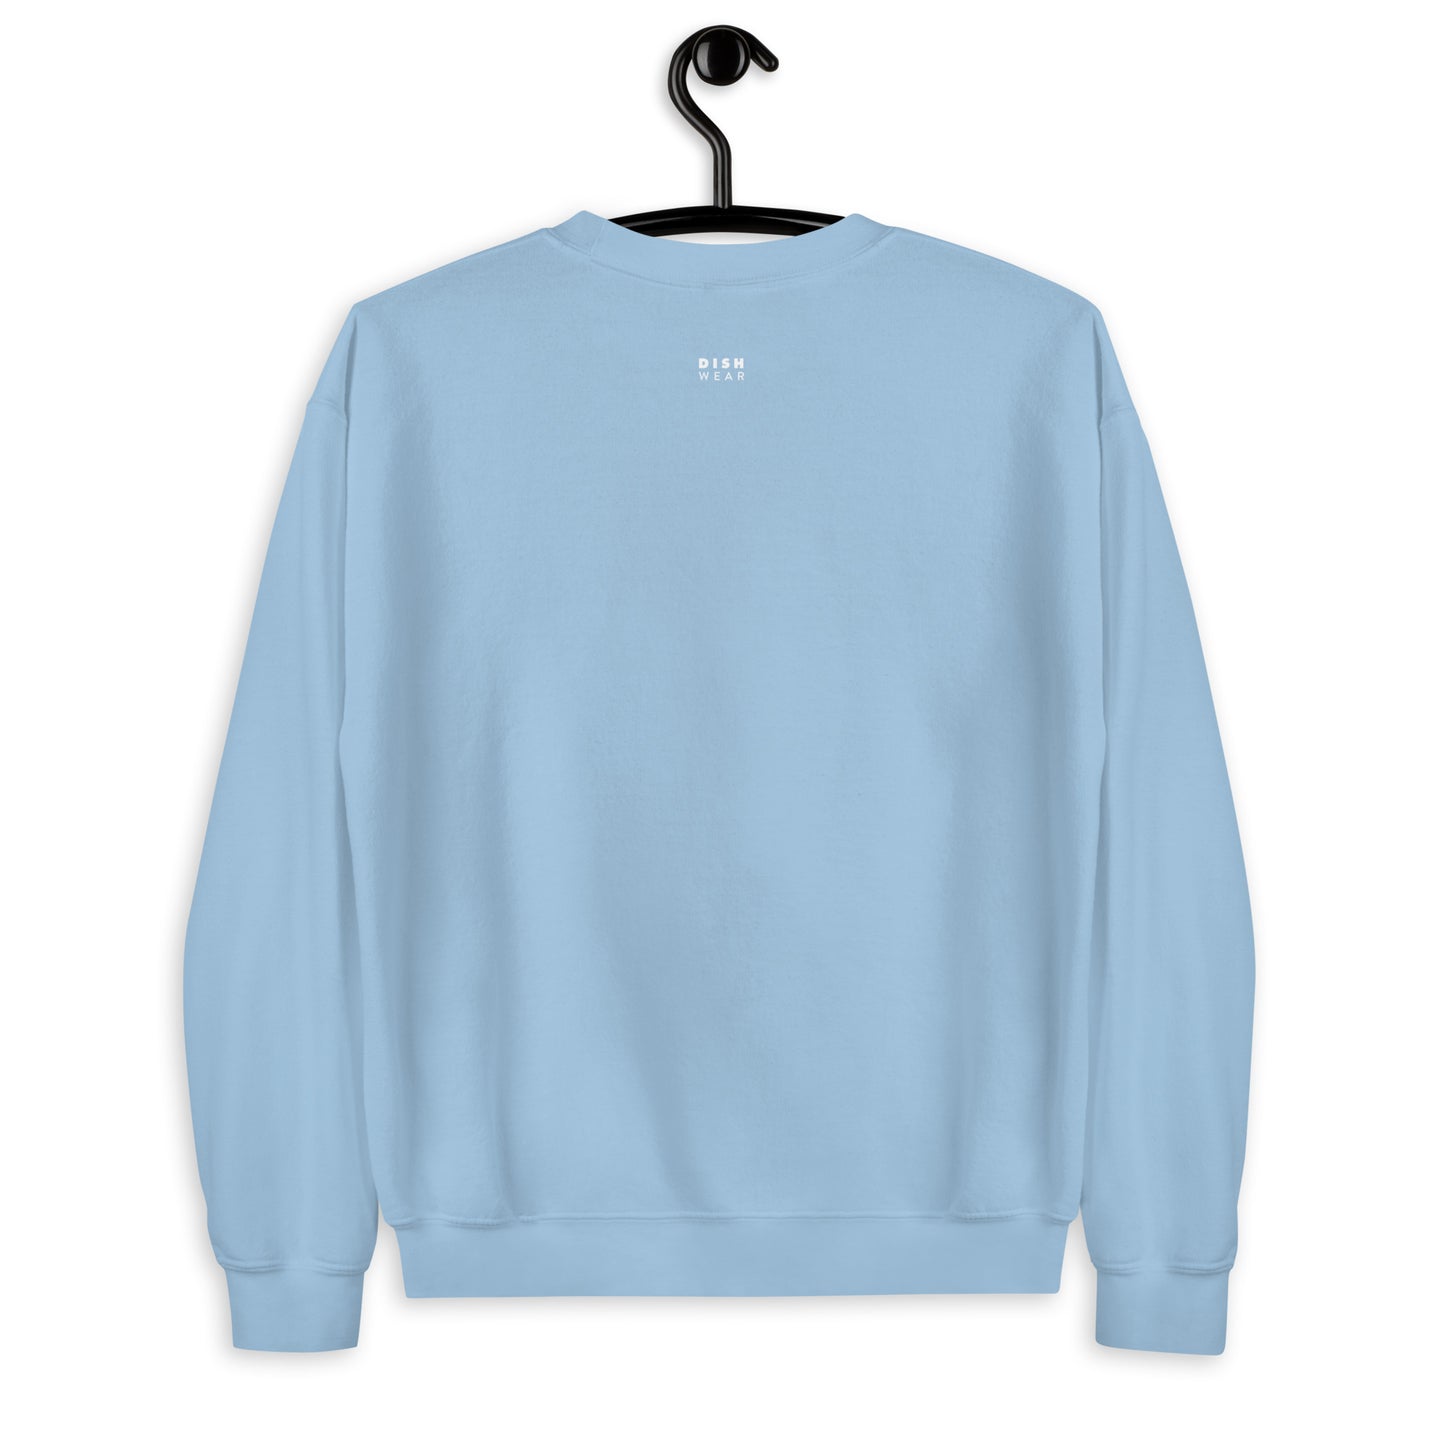 Iced Coffee Sweatshirt - Arched Font